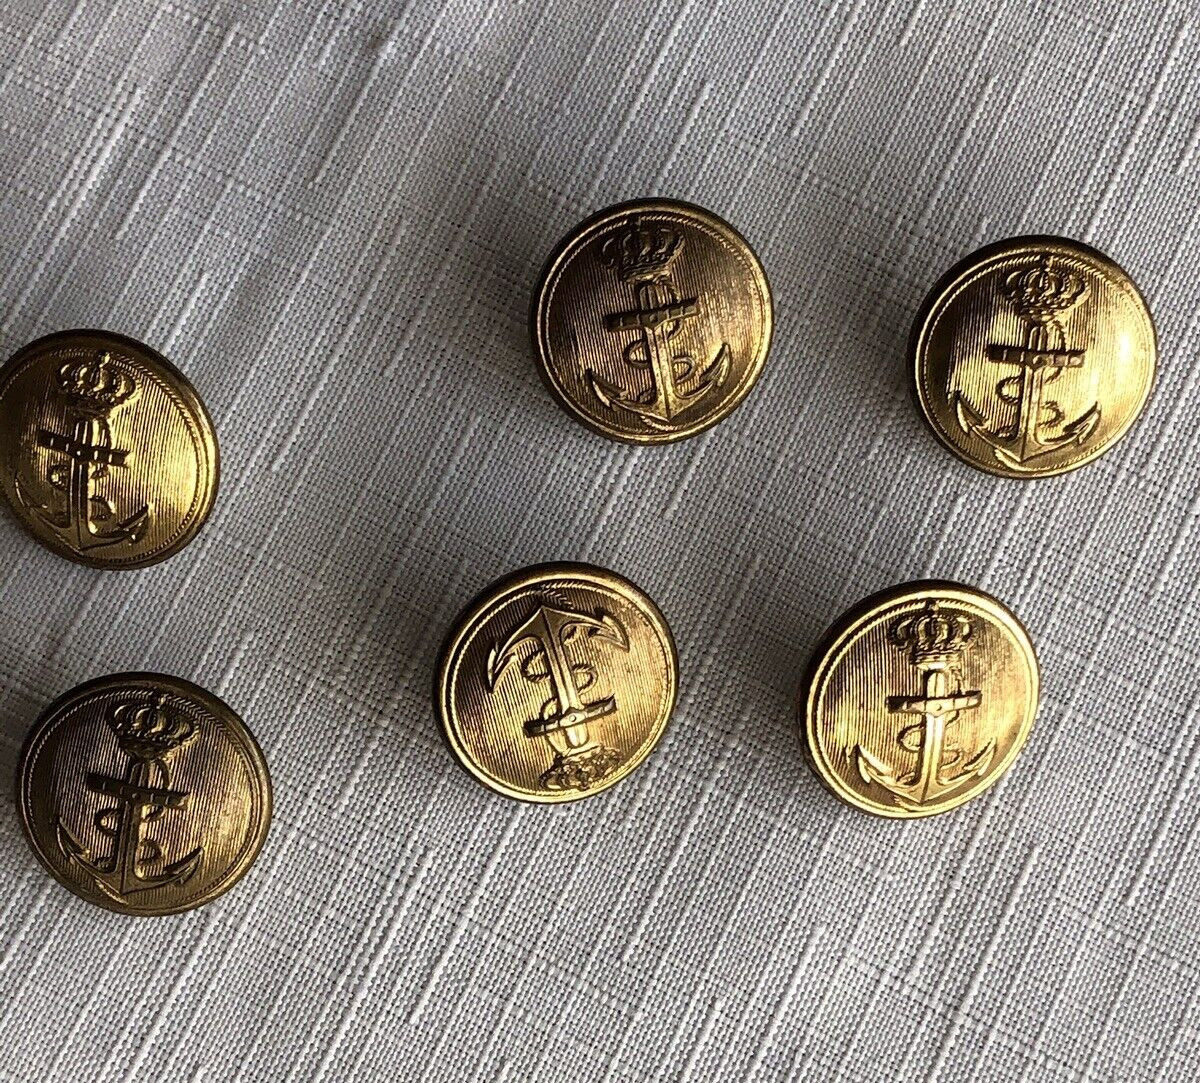 Rare, Six WWII Brass Uniform Buttons, Canadian Navy, Wm. Scully, Montreal